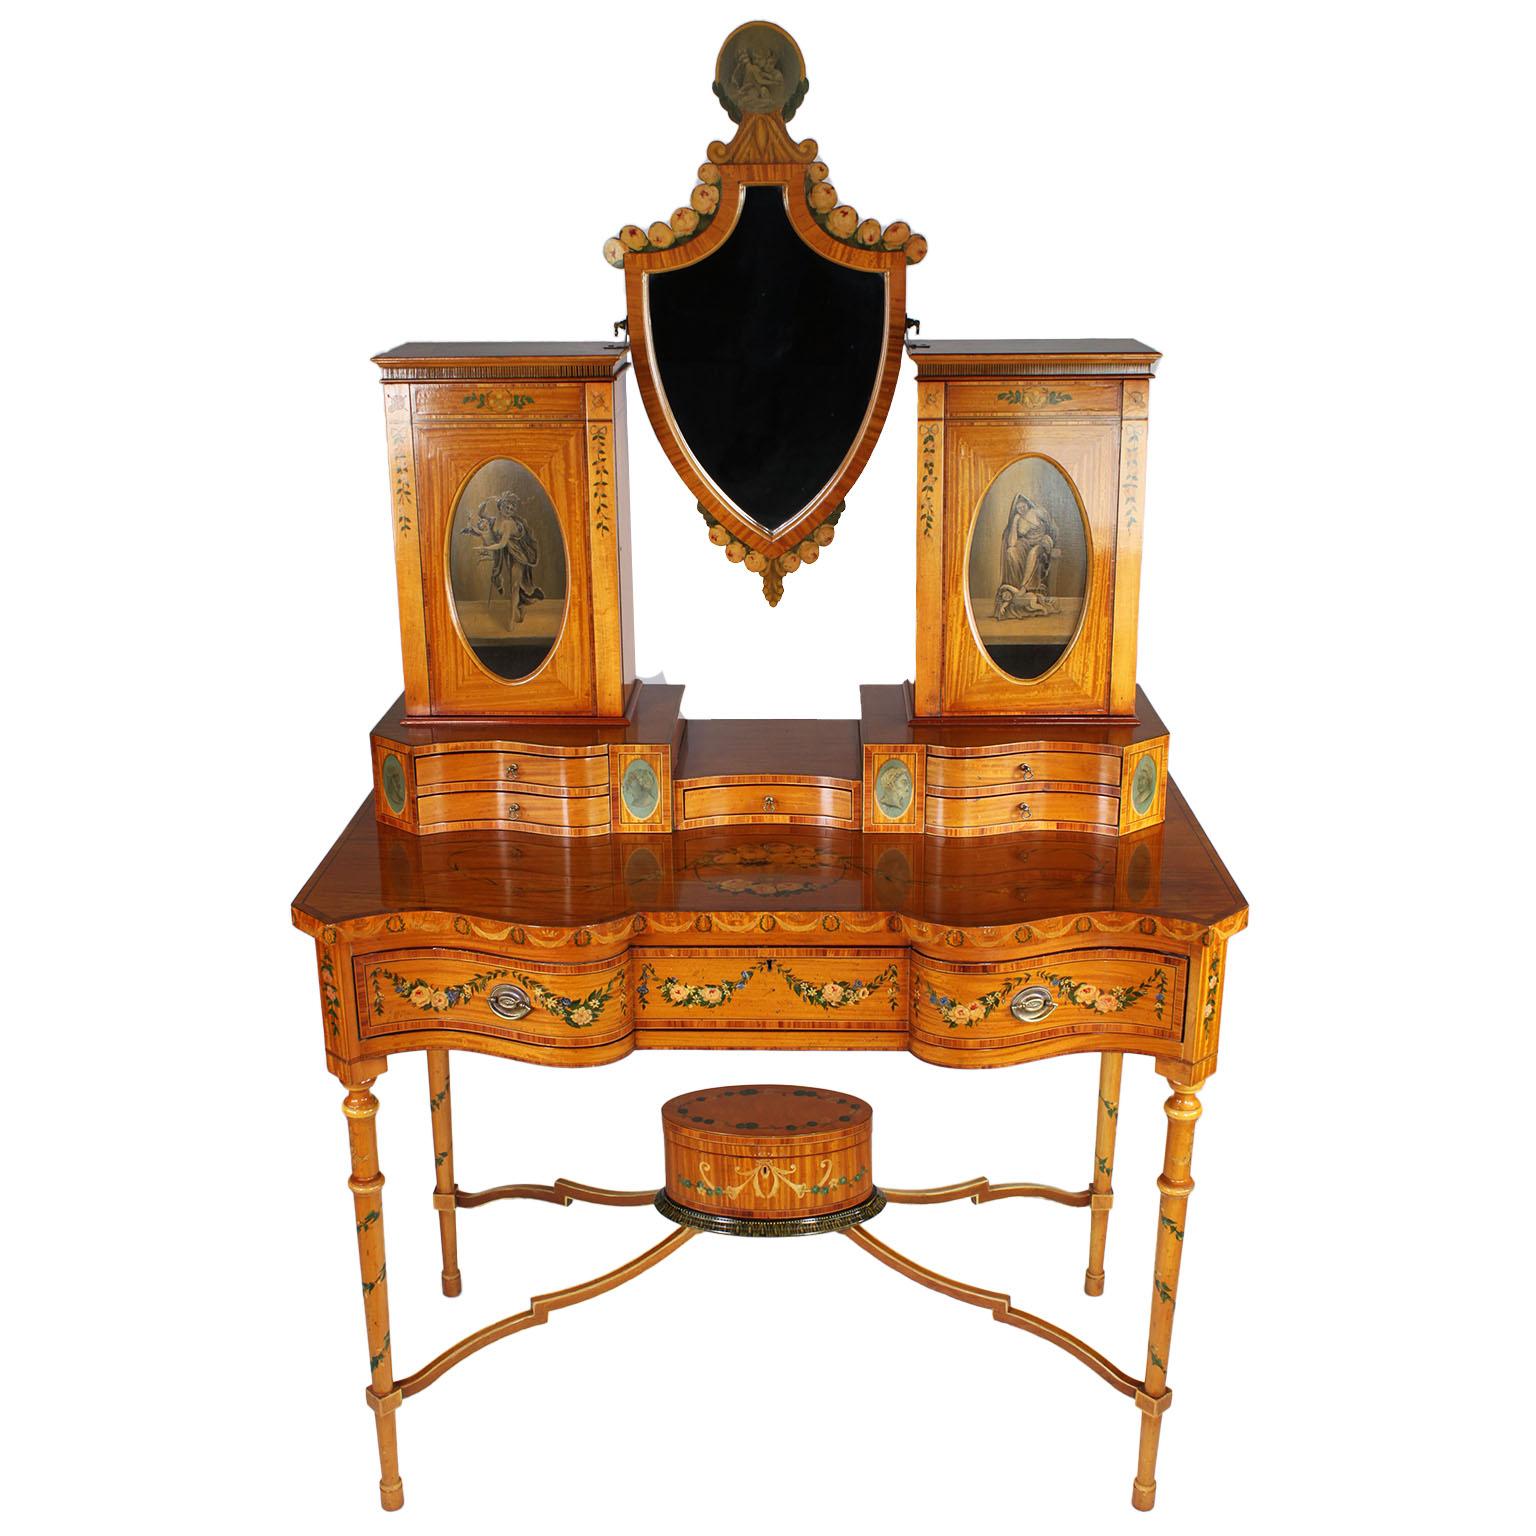 A very fine English 19th century Adam style Polychrome painted satinwood vanity table. The ornately decorated cabinet surmounted with an easel mirror flanked by a pair of storage compartments centered with oval paintings, all above five top drawers,